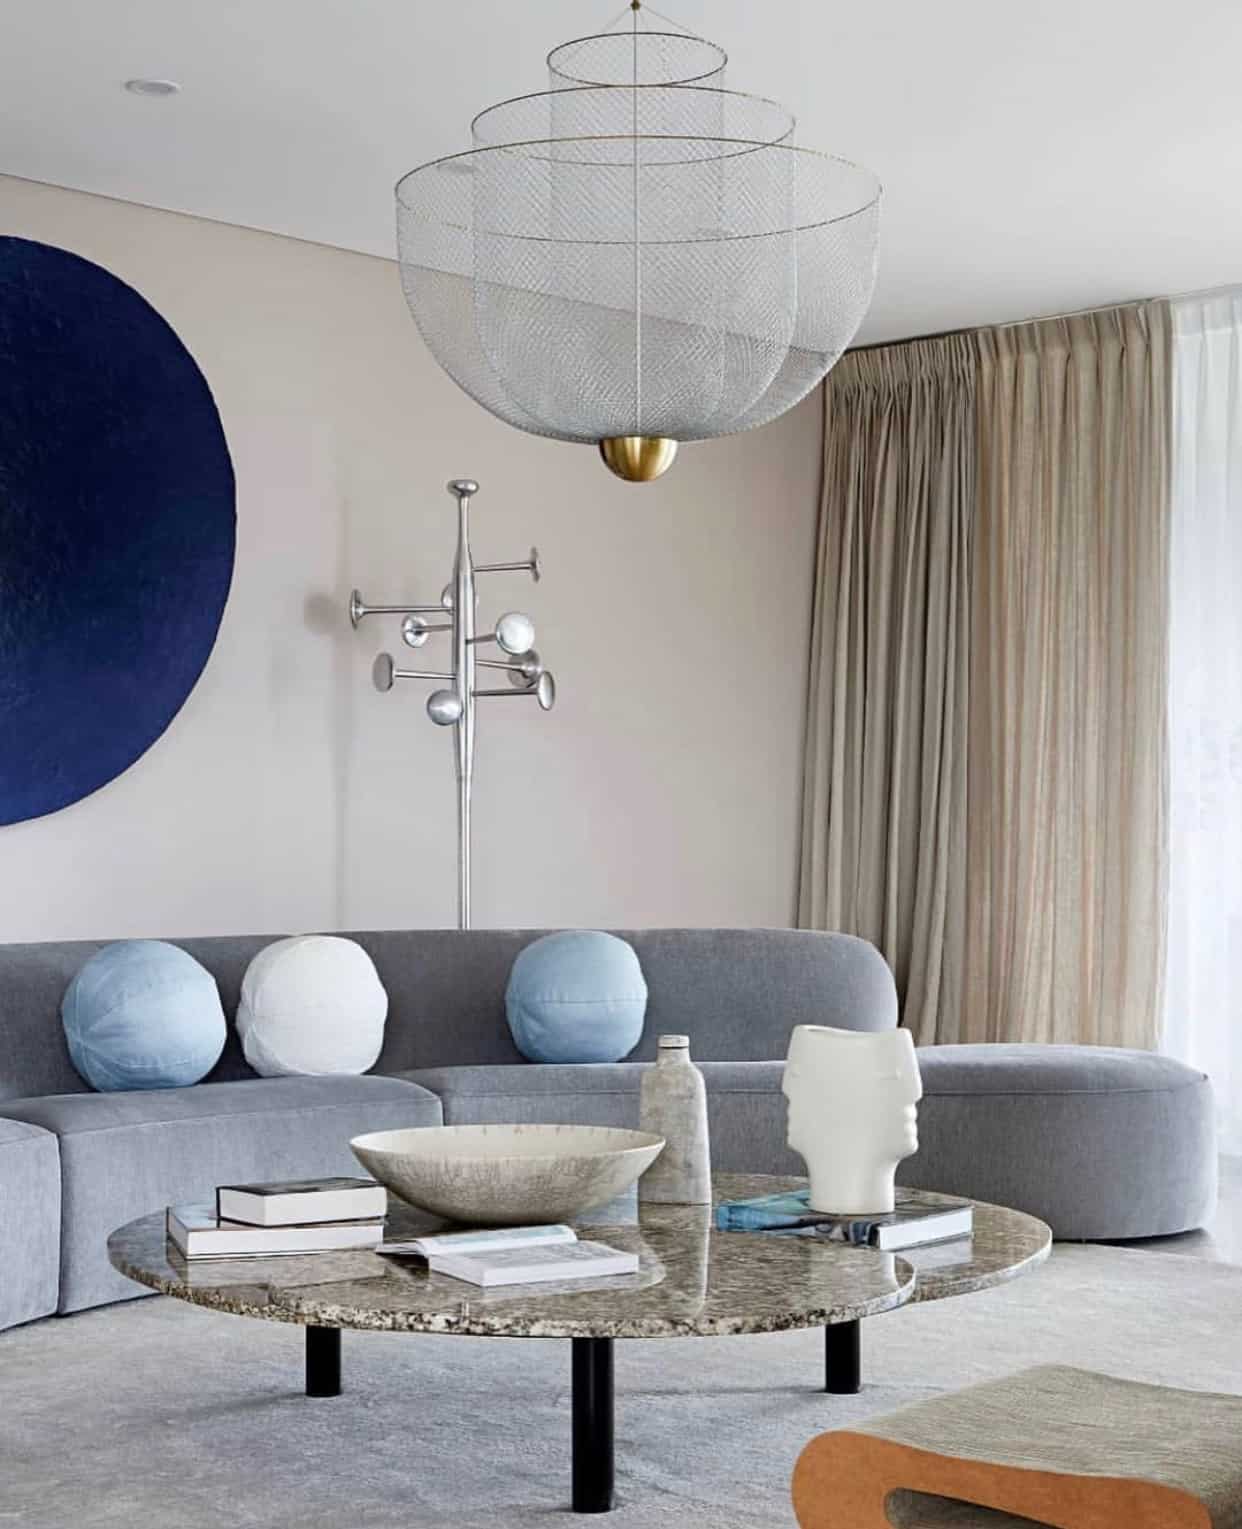 Interior trends 2021 based on your zodiac sign Taurus